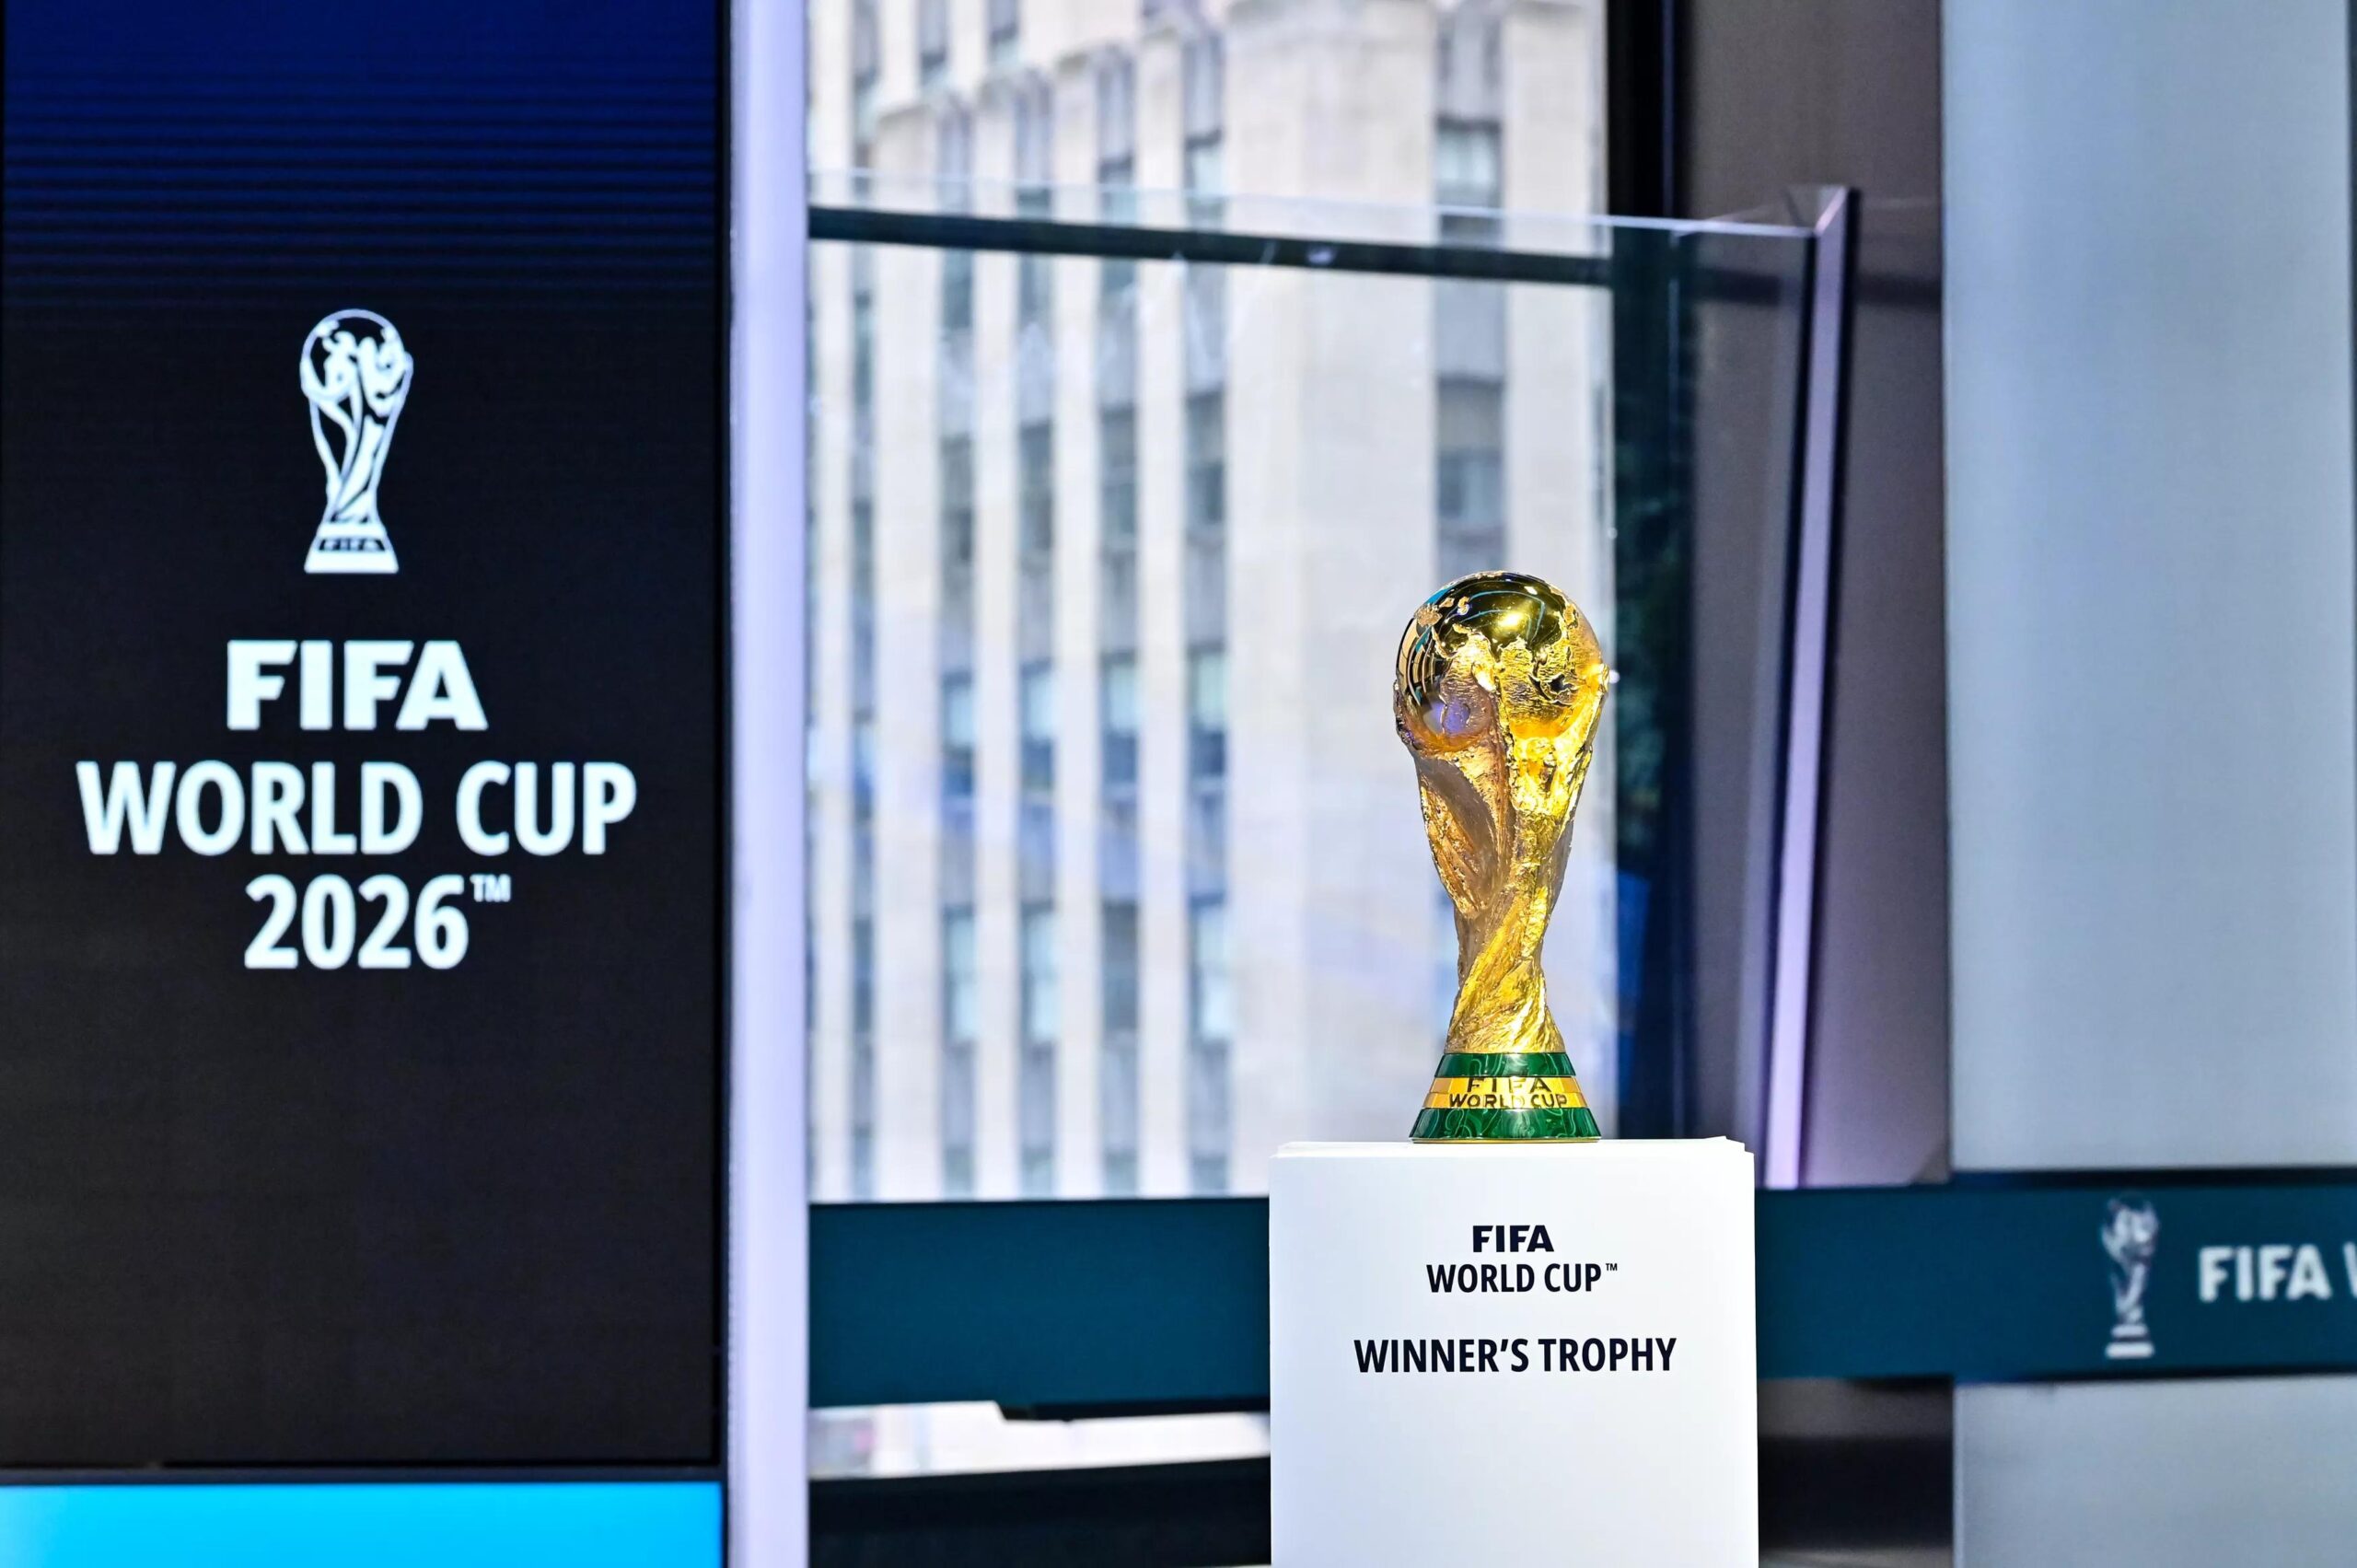 2026 FIFA World Cup: Fans to watch 6 games per day